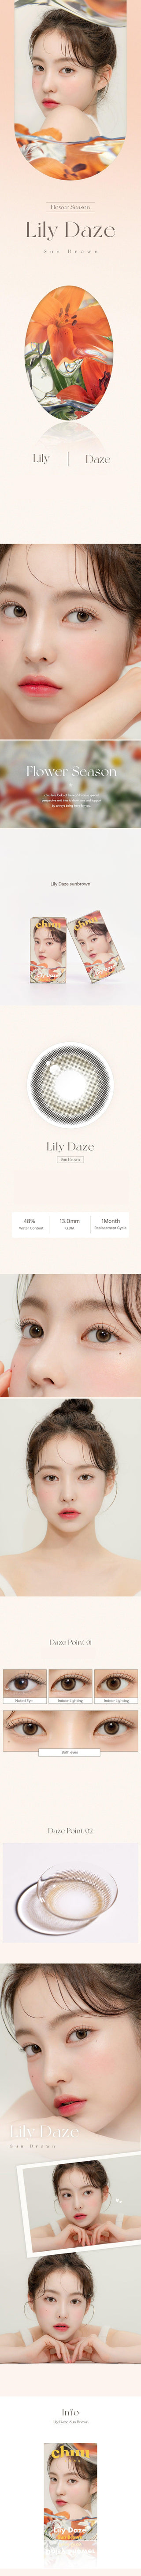 Asian model demonstrating a K-idol-inspired look with Chuu Lily Daze Sun Brown coloured contact lenses, highlighting the instant brightening and enlarging effect of the circle contact lenses over dark irises.